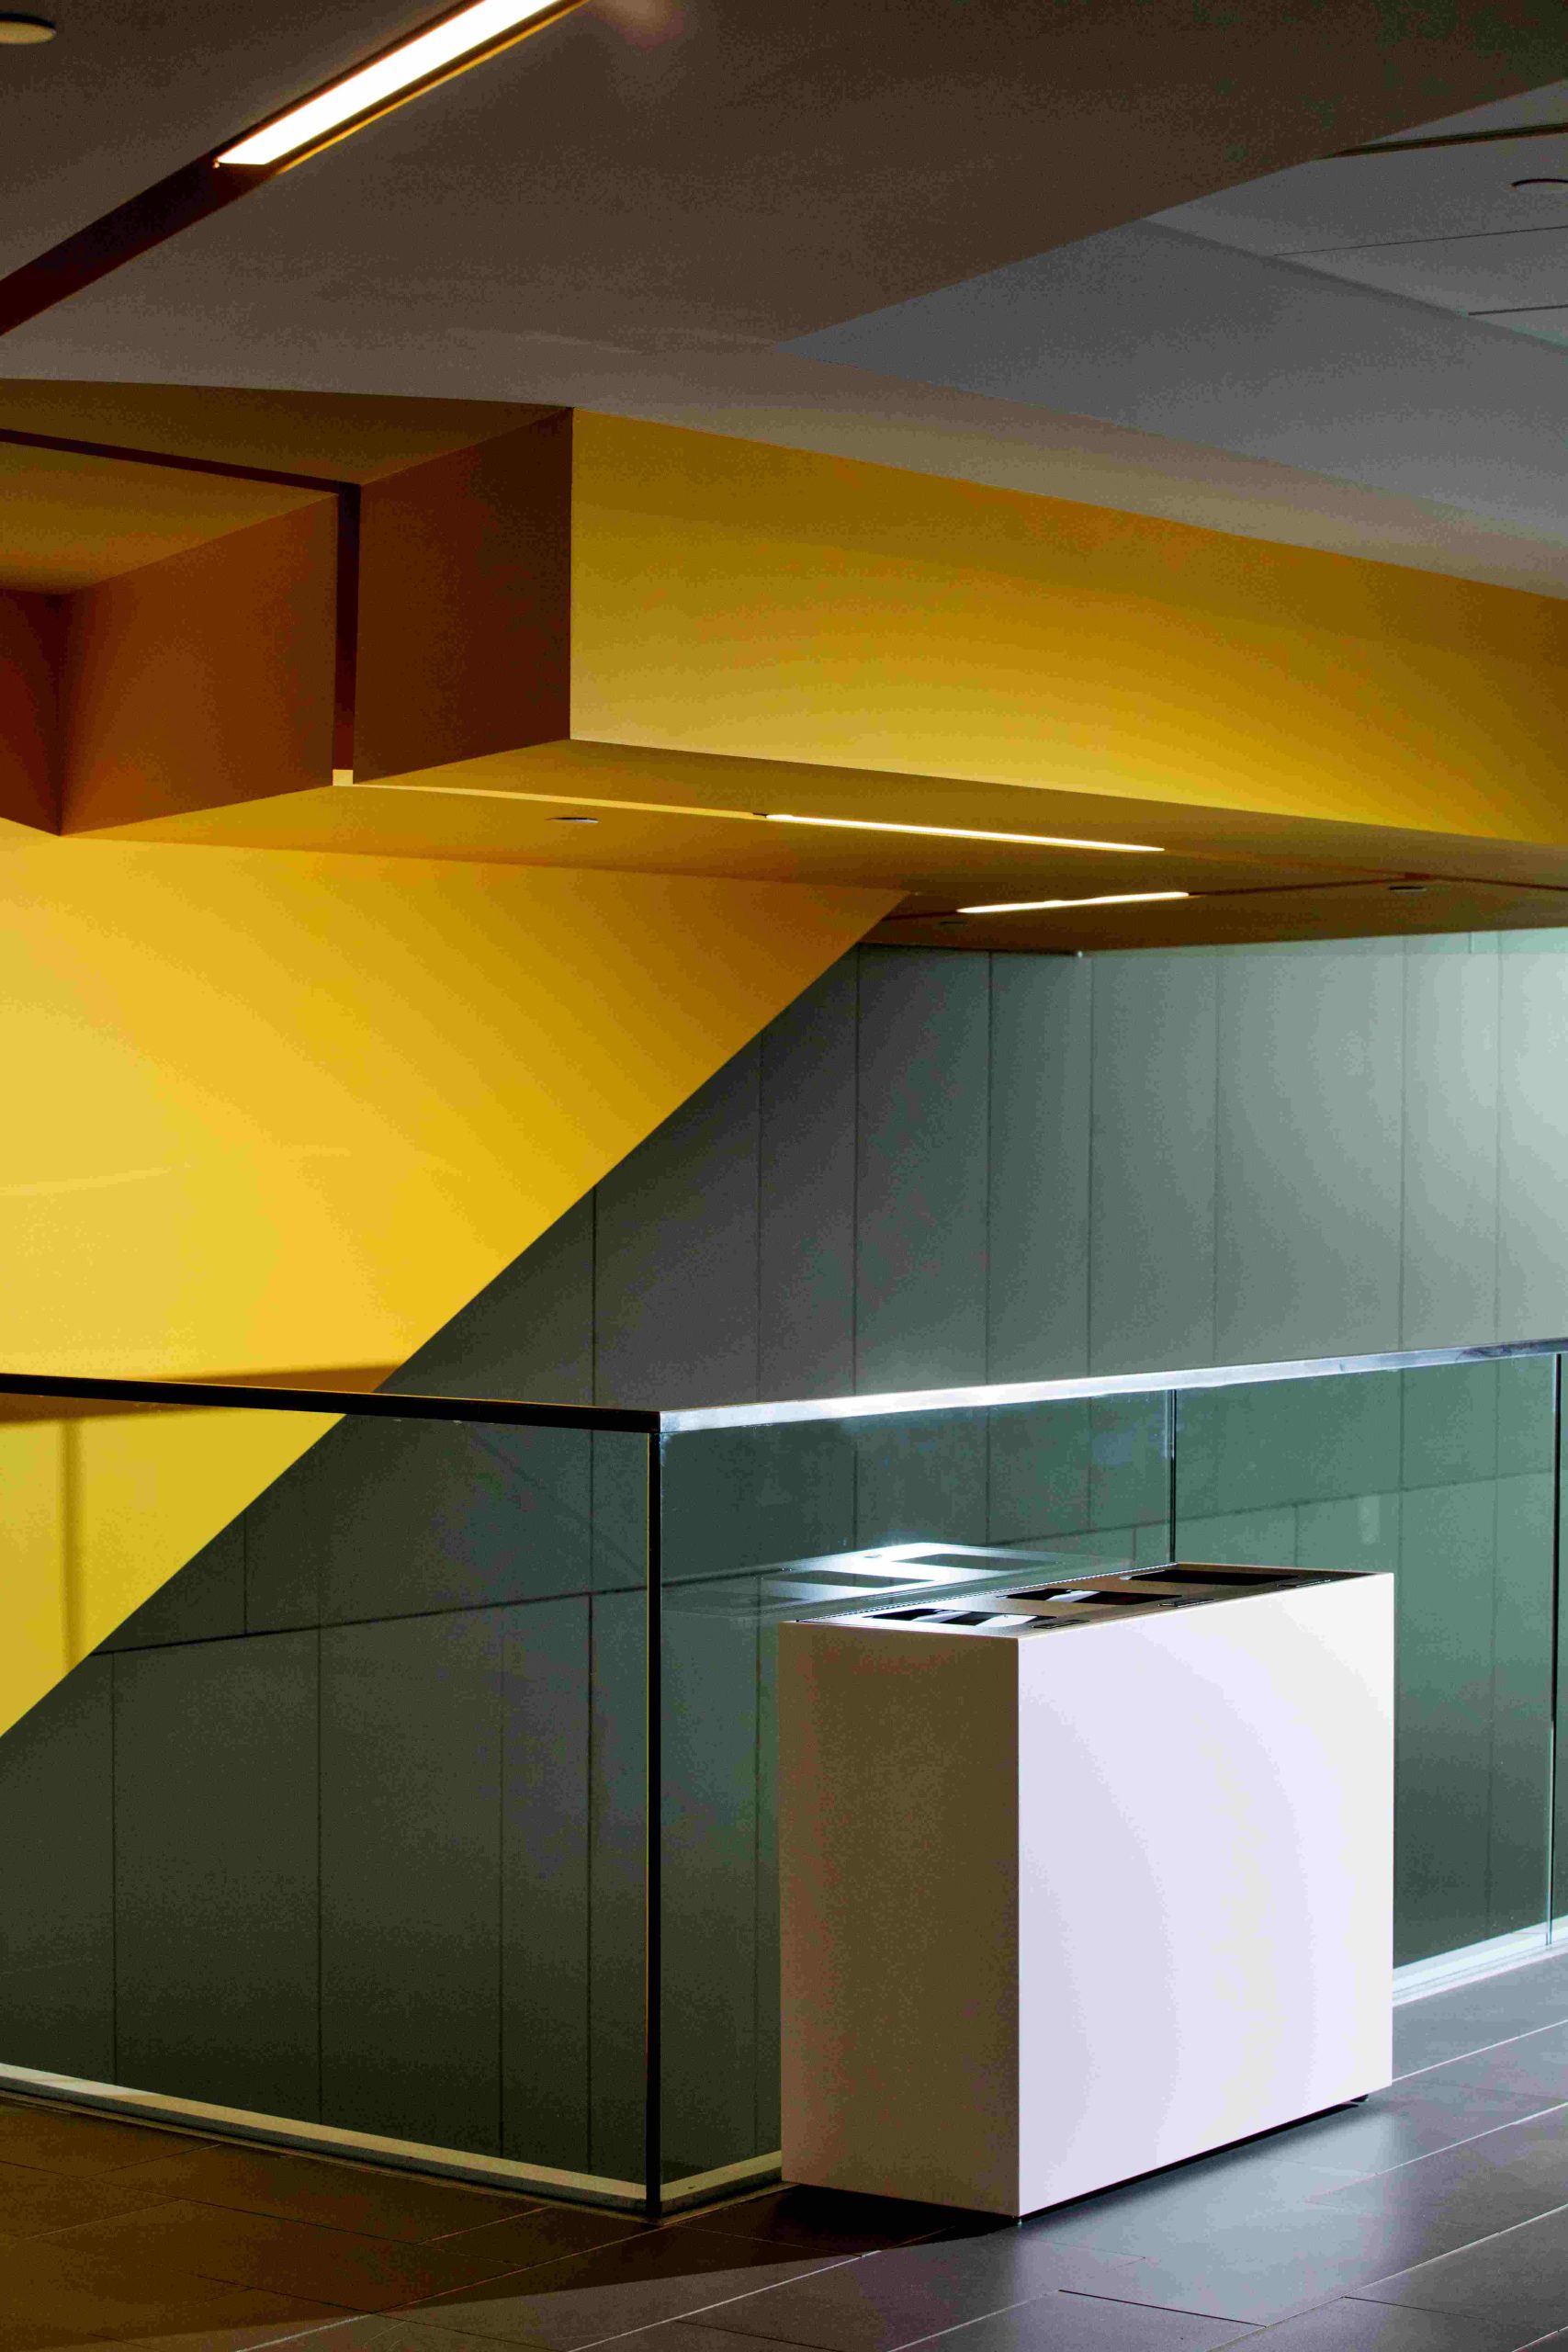 Mezzo recycling and waste container in an architectural interesting space